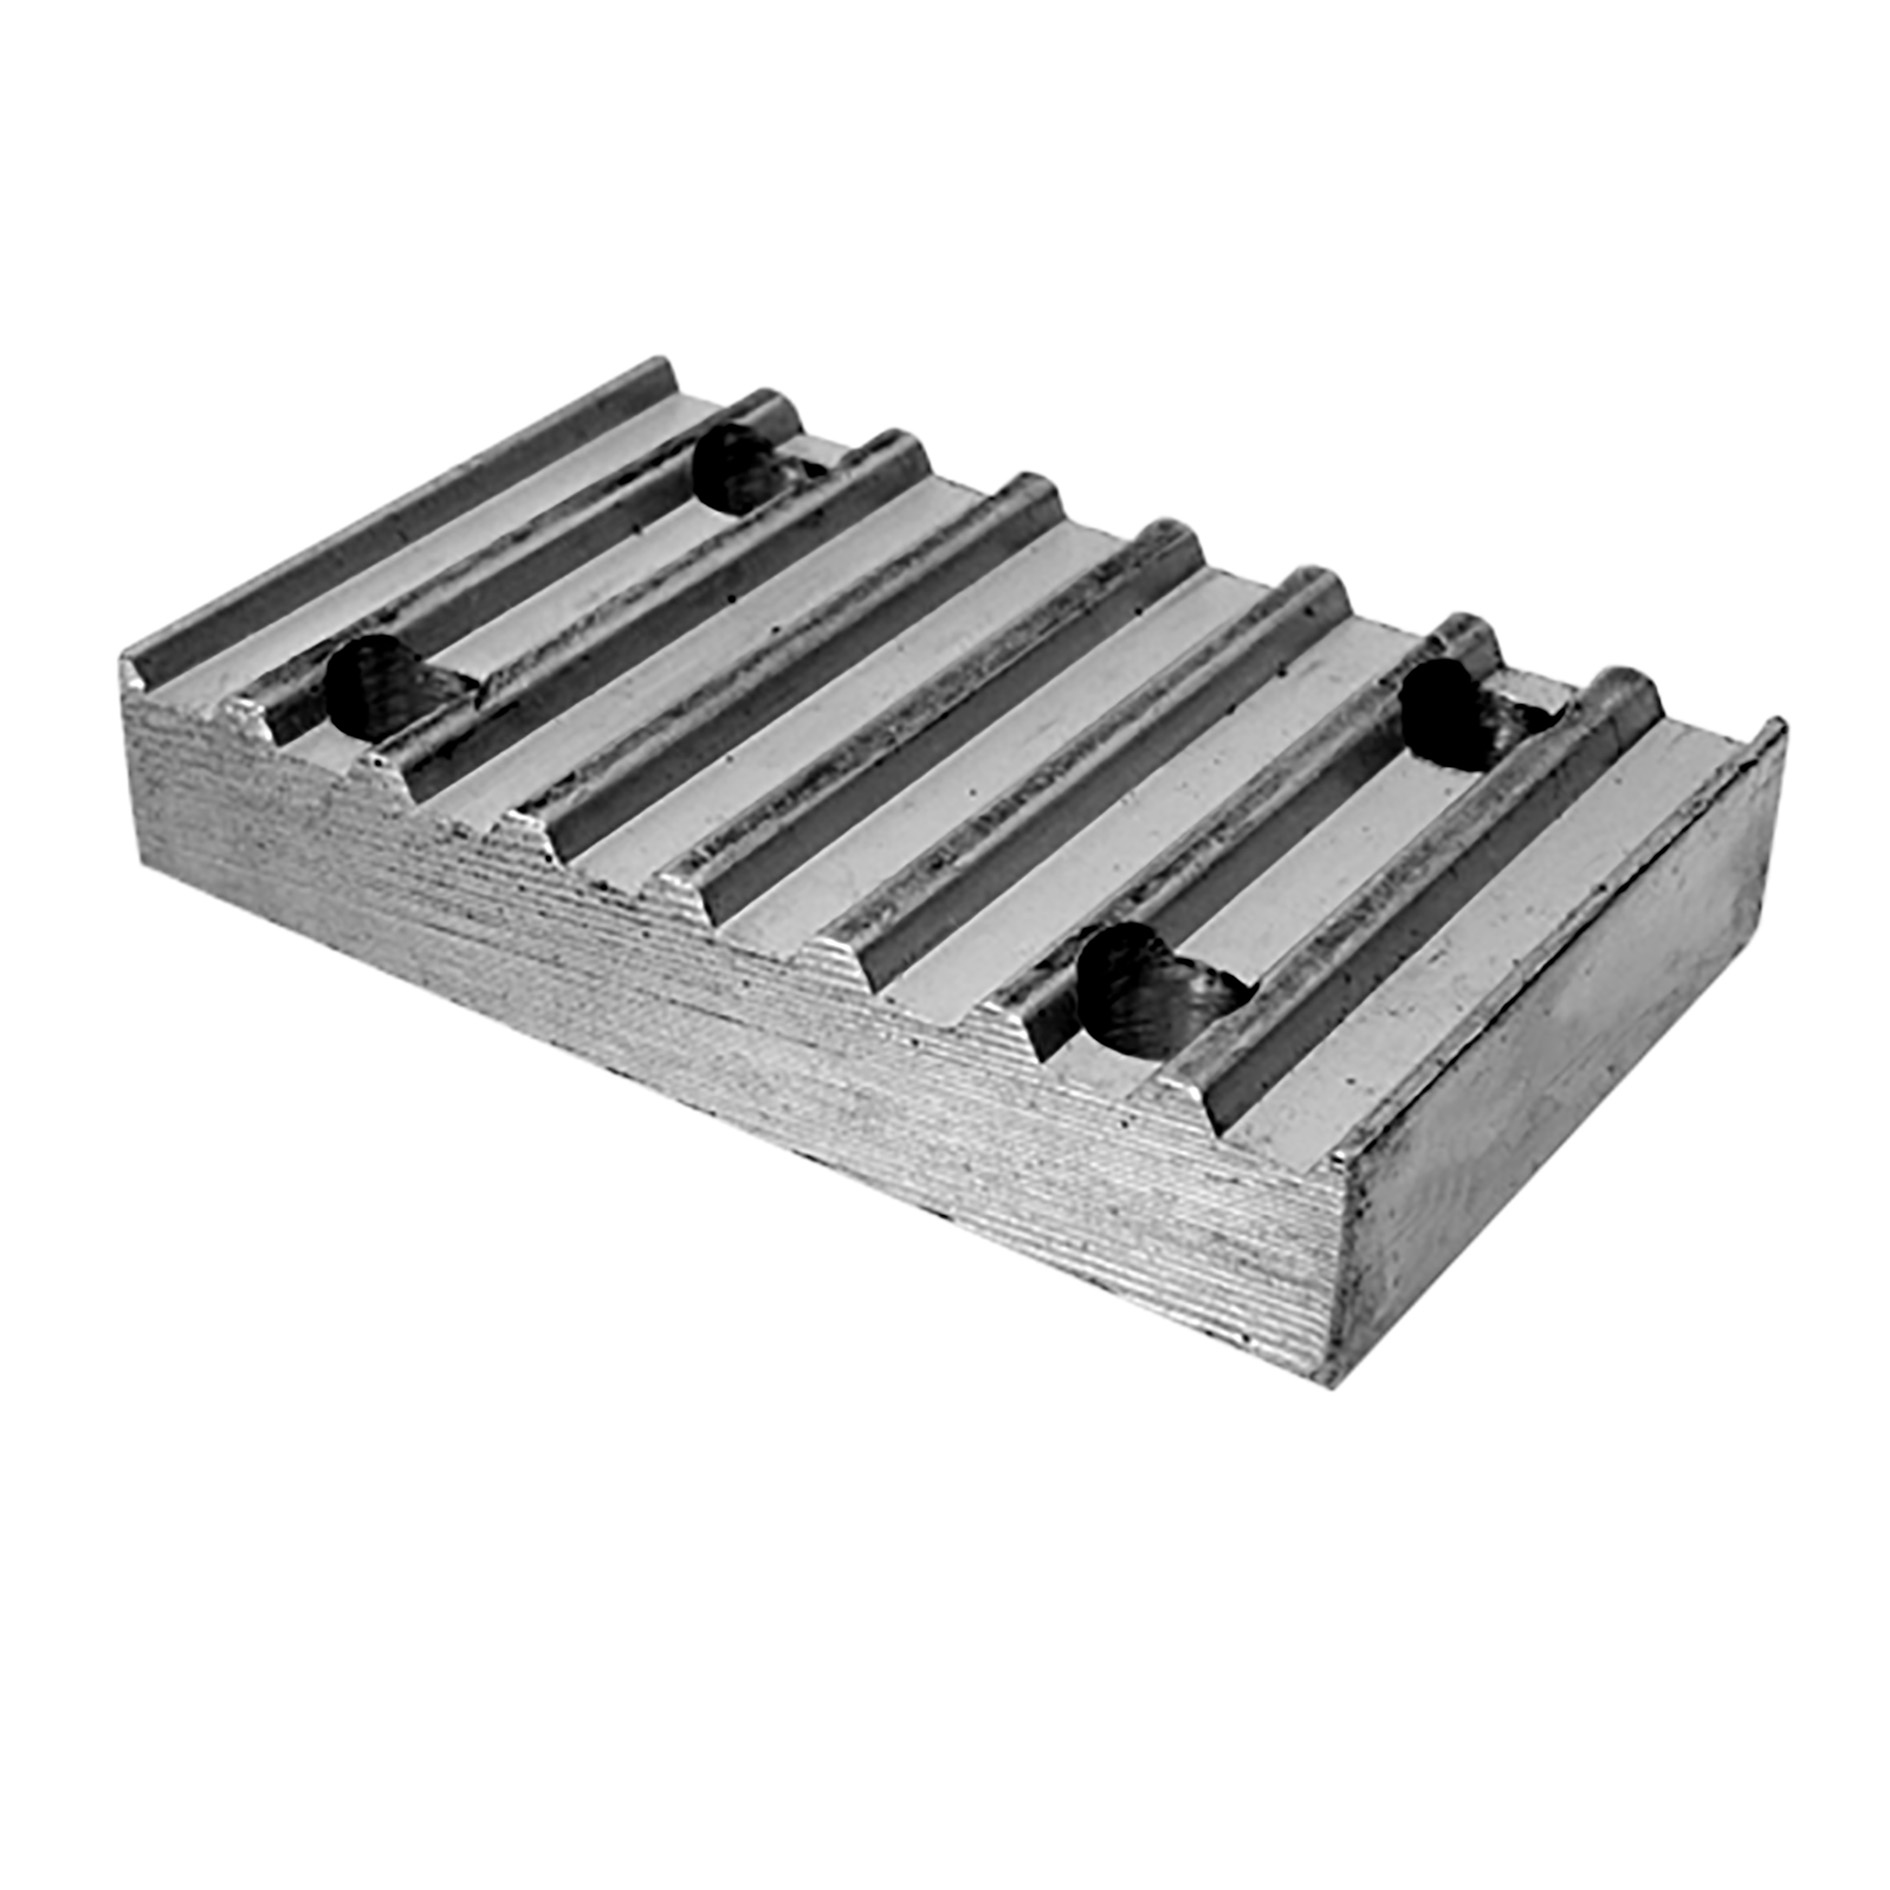 Connecting plate for RPP type timing belts - RPP8 - 50mm - RPP